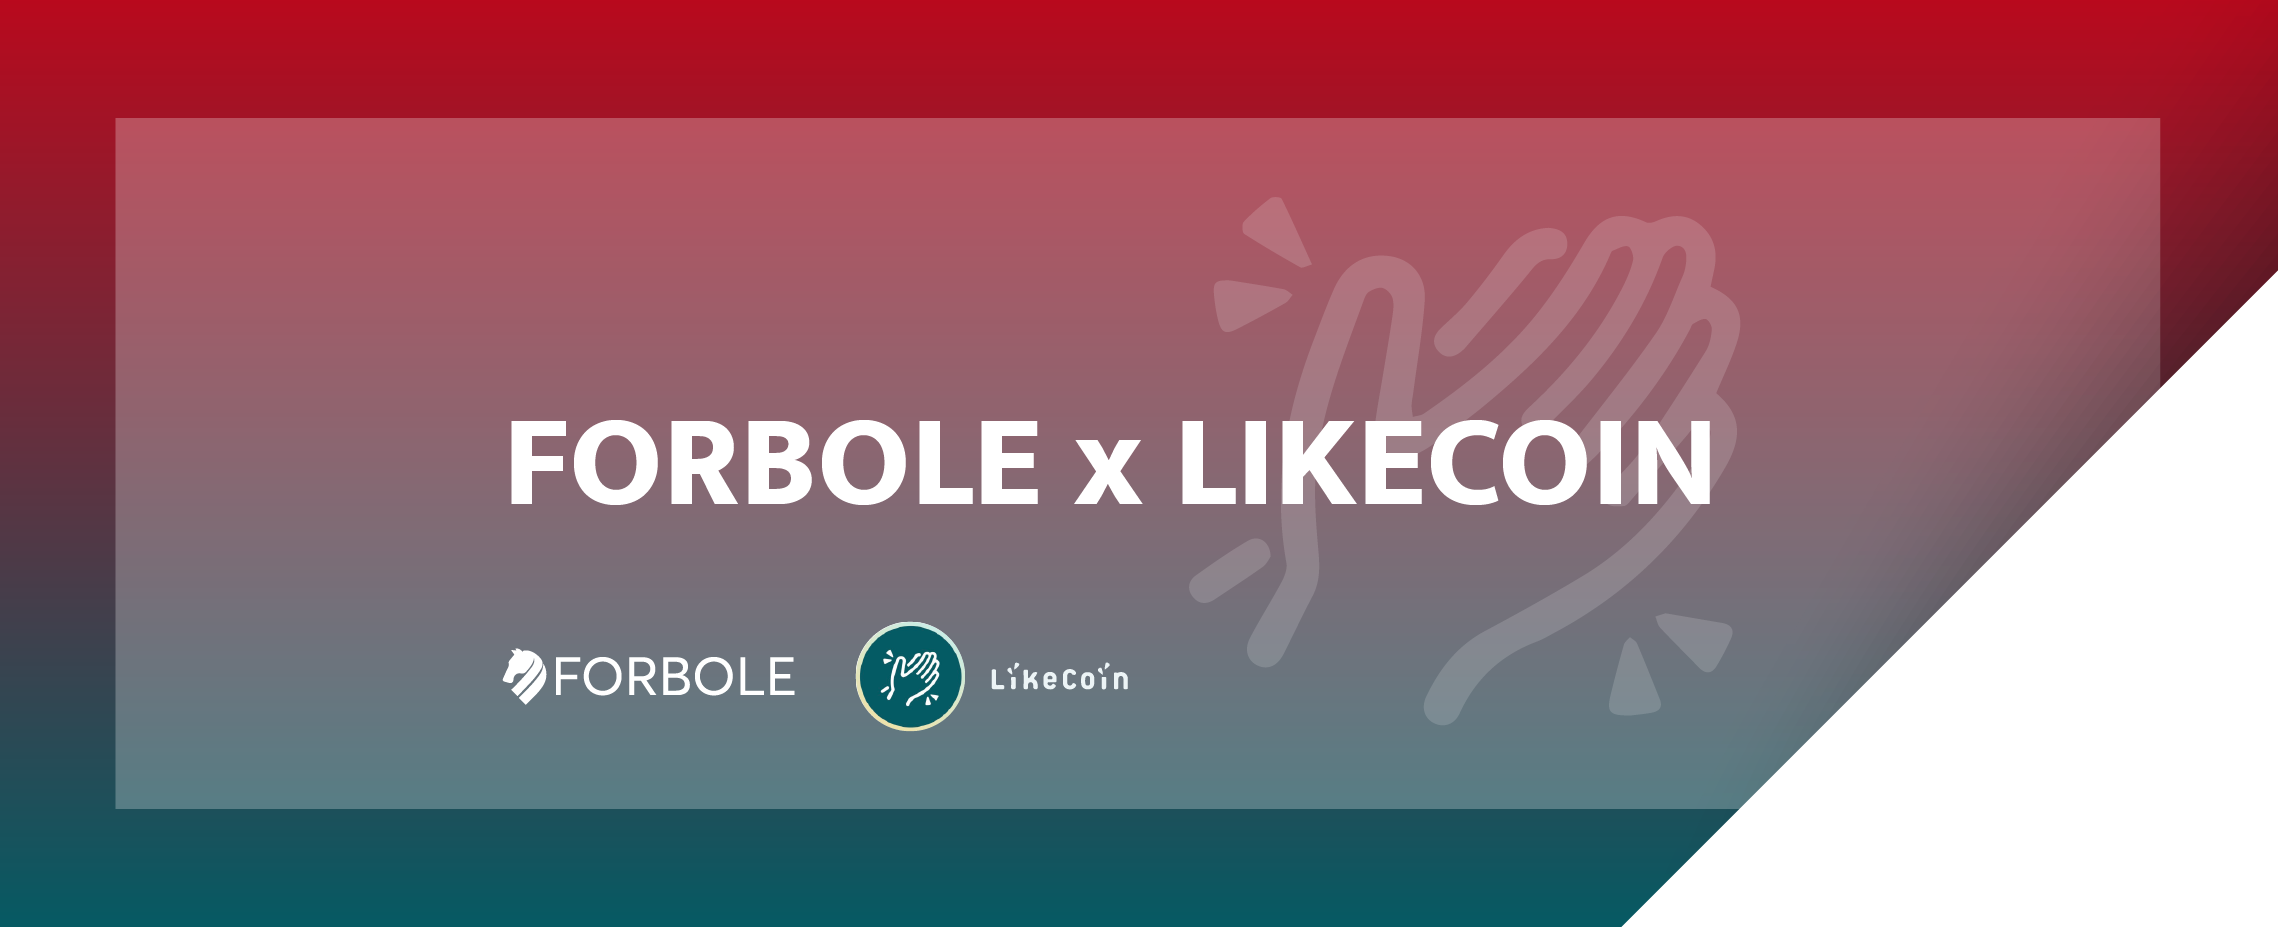 Forbole is raising its commission rate on LikeCoin